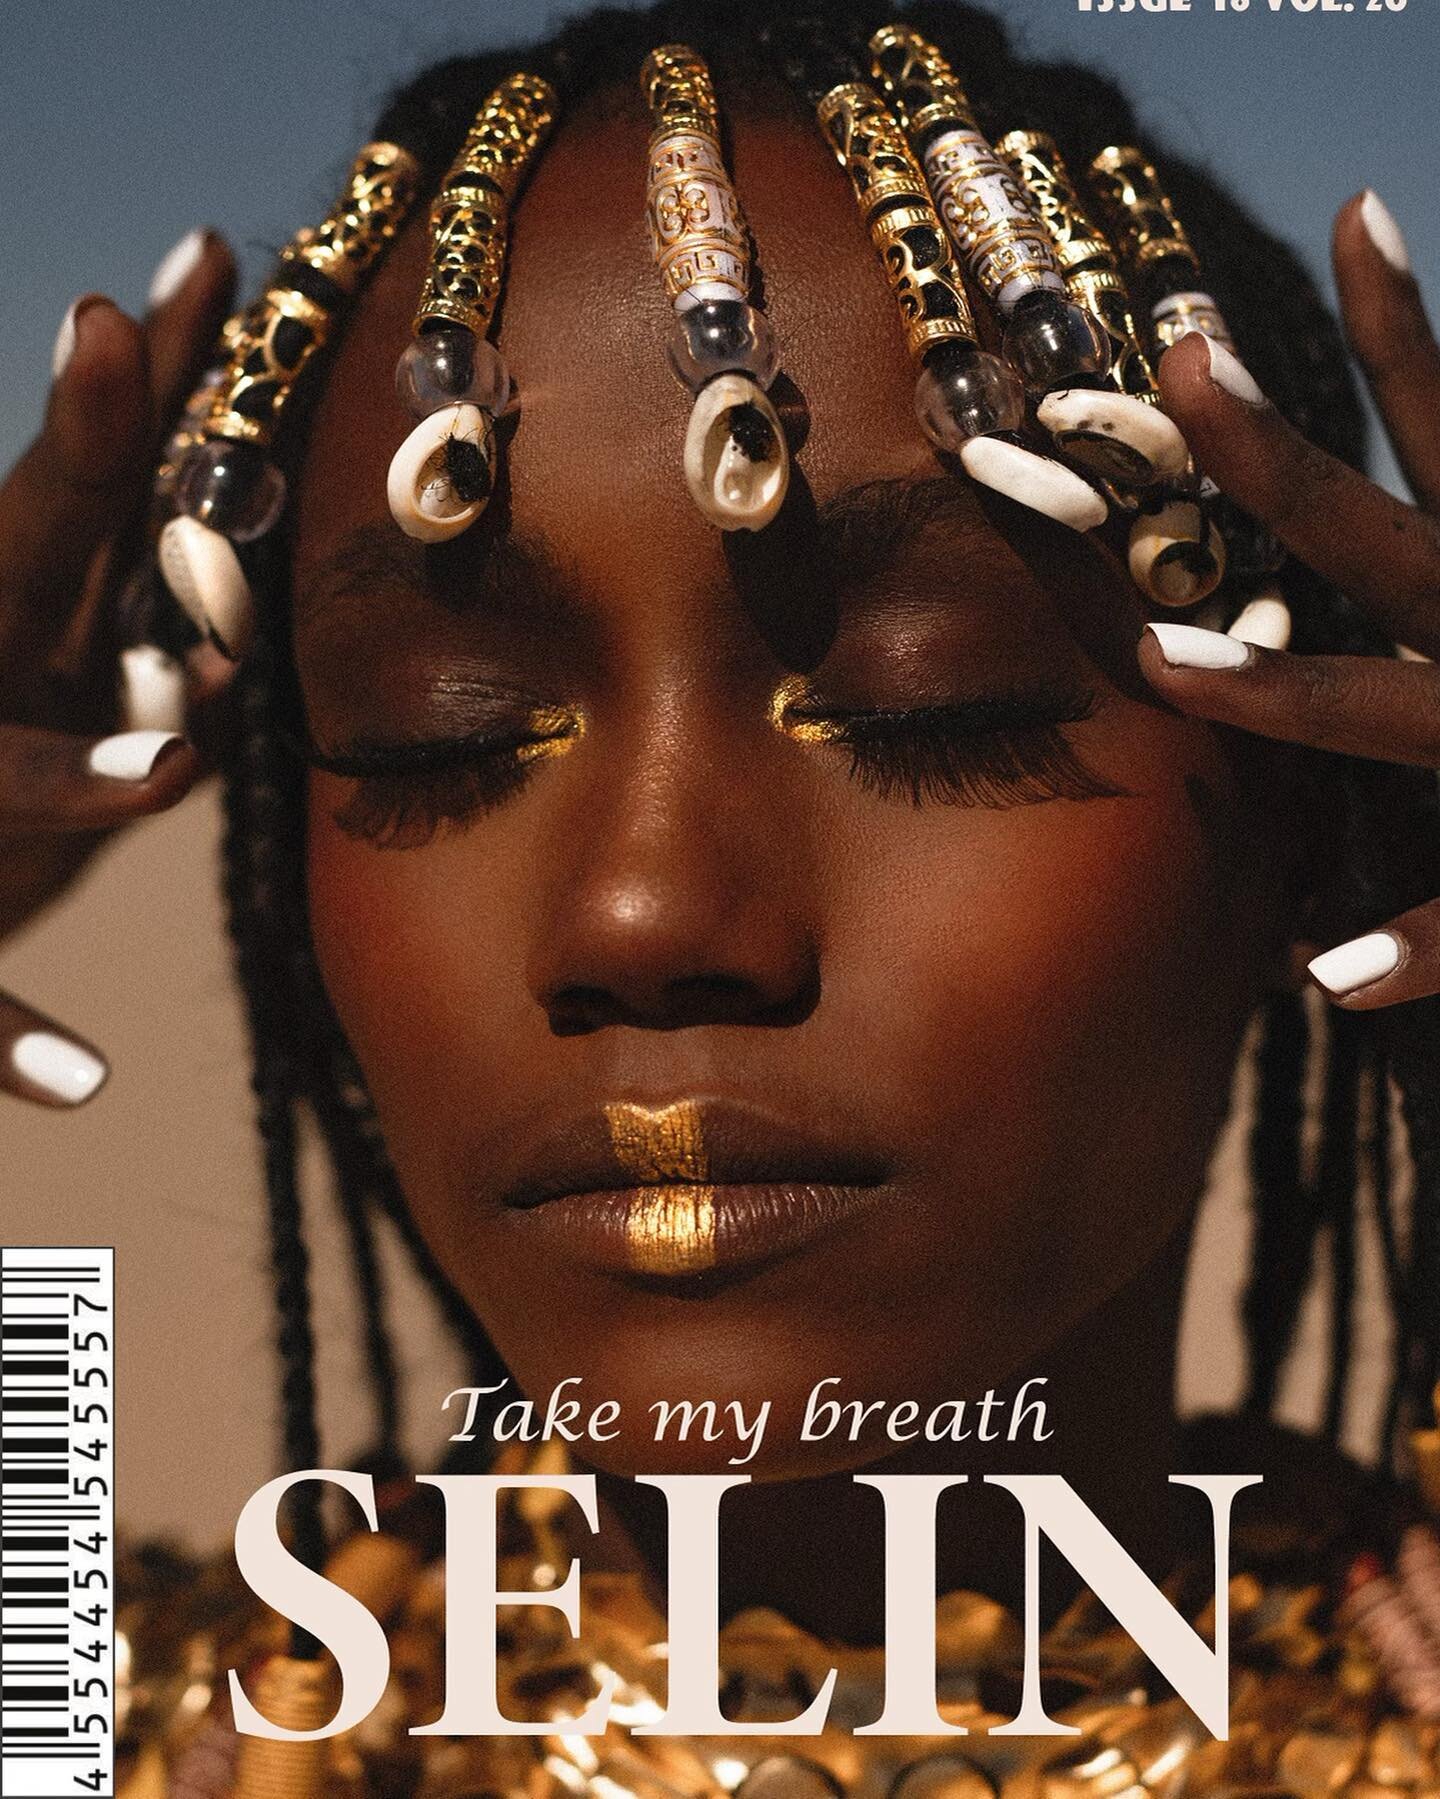 S E L I N 
&bull;
&bull;
Always grateful for a publication. A cover always makes it even more special 😍
&bull;
&bull;
&bull;
&bull;
Team
Model: @kasemire.dieumerci 
Makeup: @shadesofradiancebeauty 
Hair: @slctressbyjoelle 
Styling: @styled_by_kanu 
